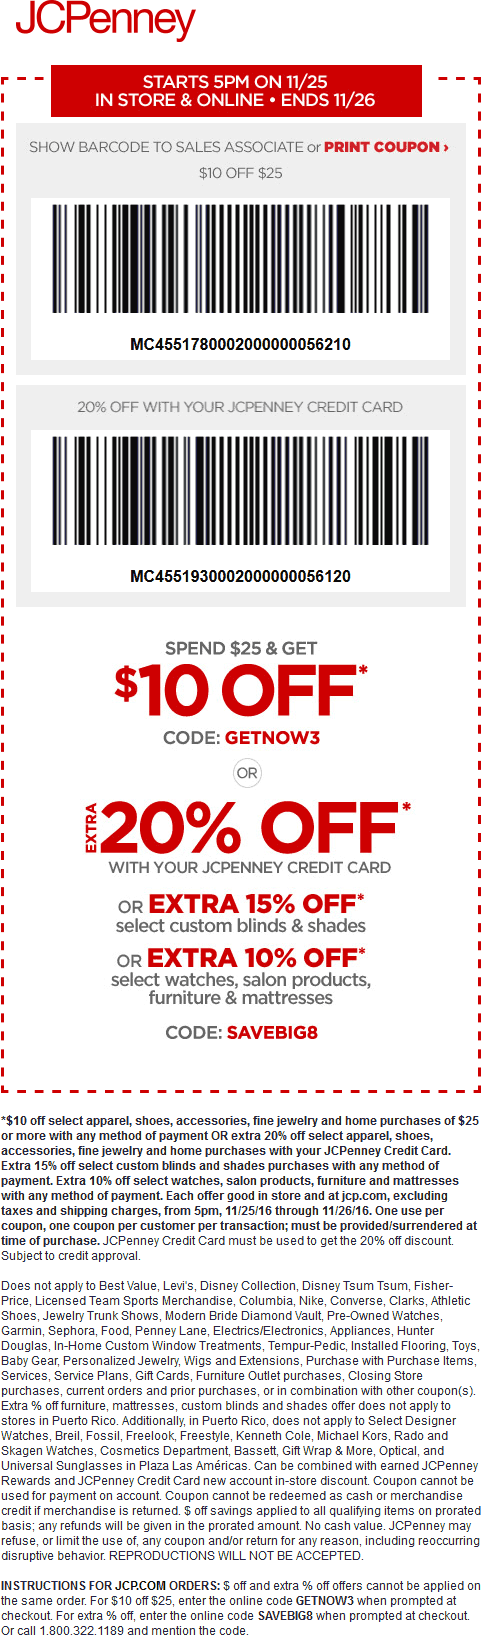 jcpa jcpenney portrait coupons